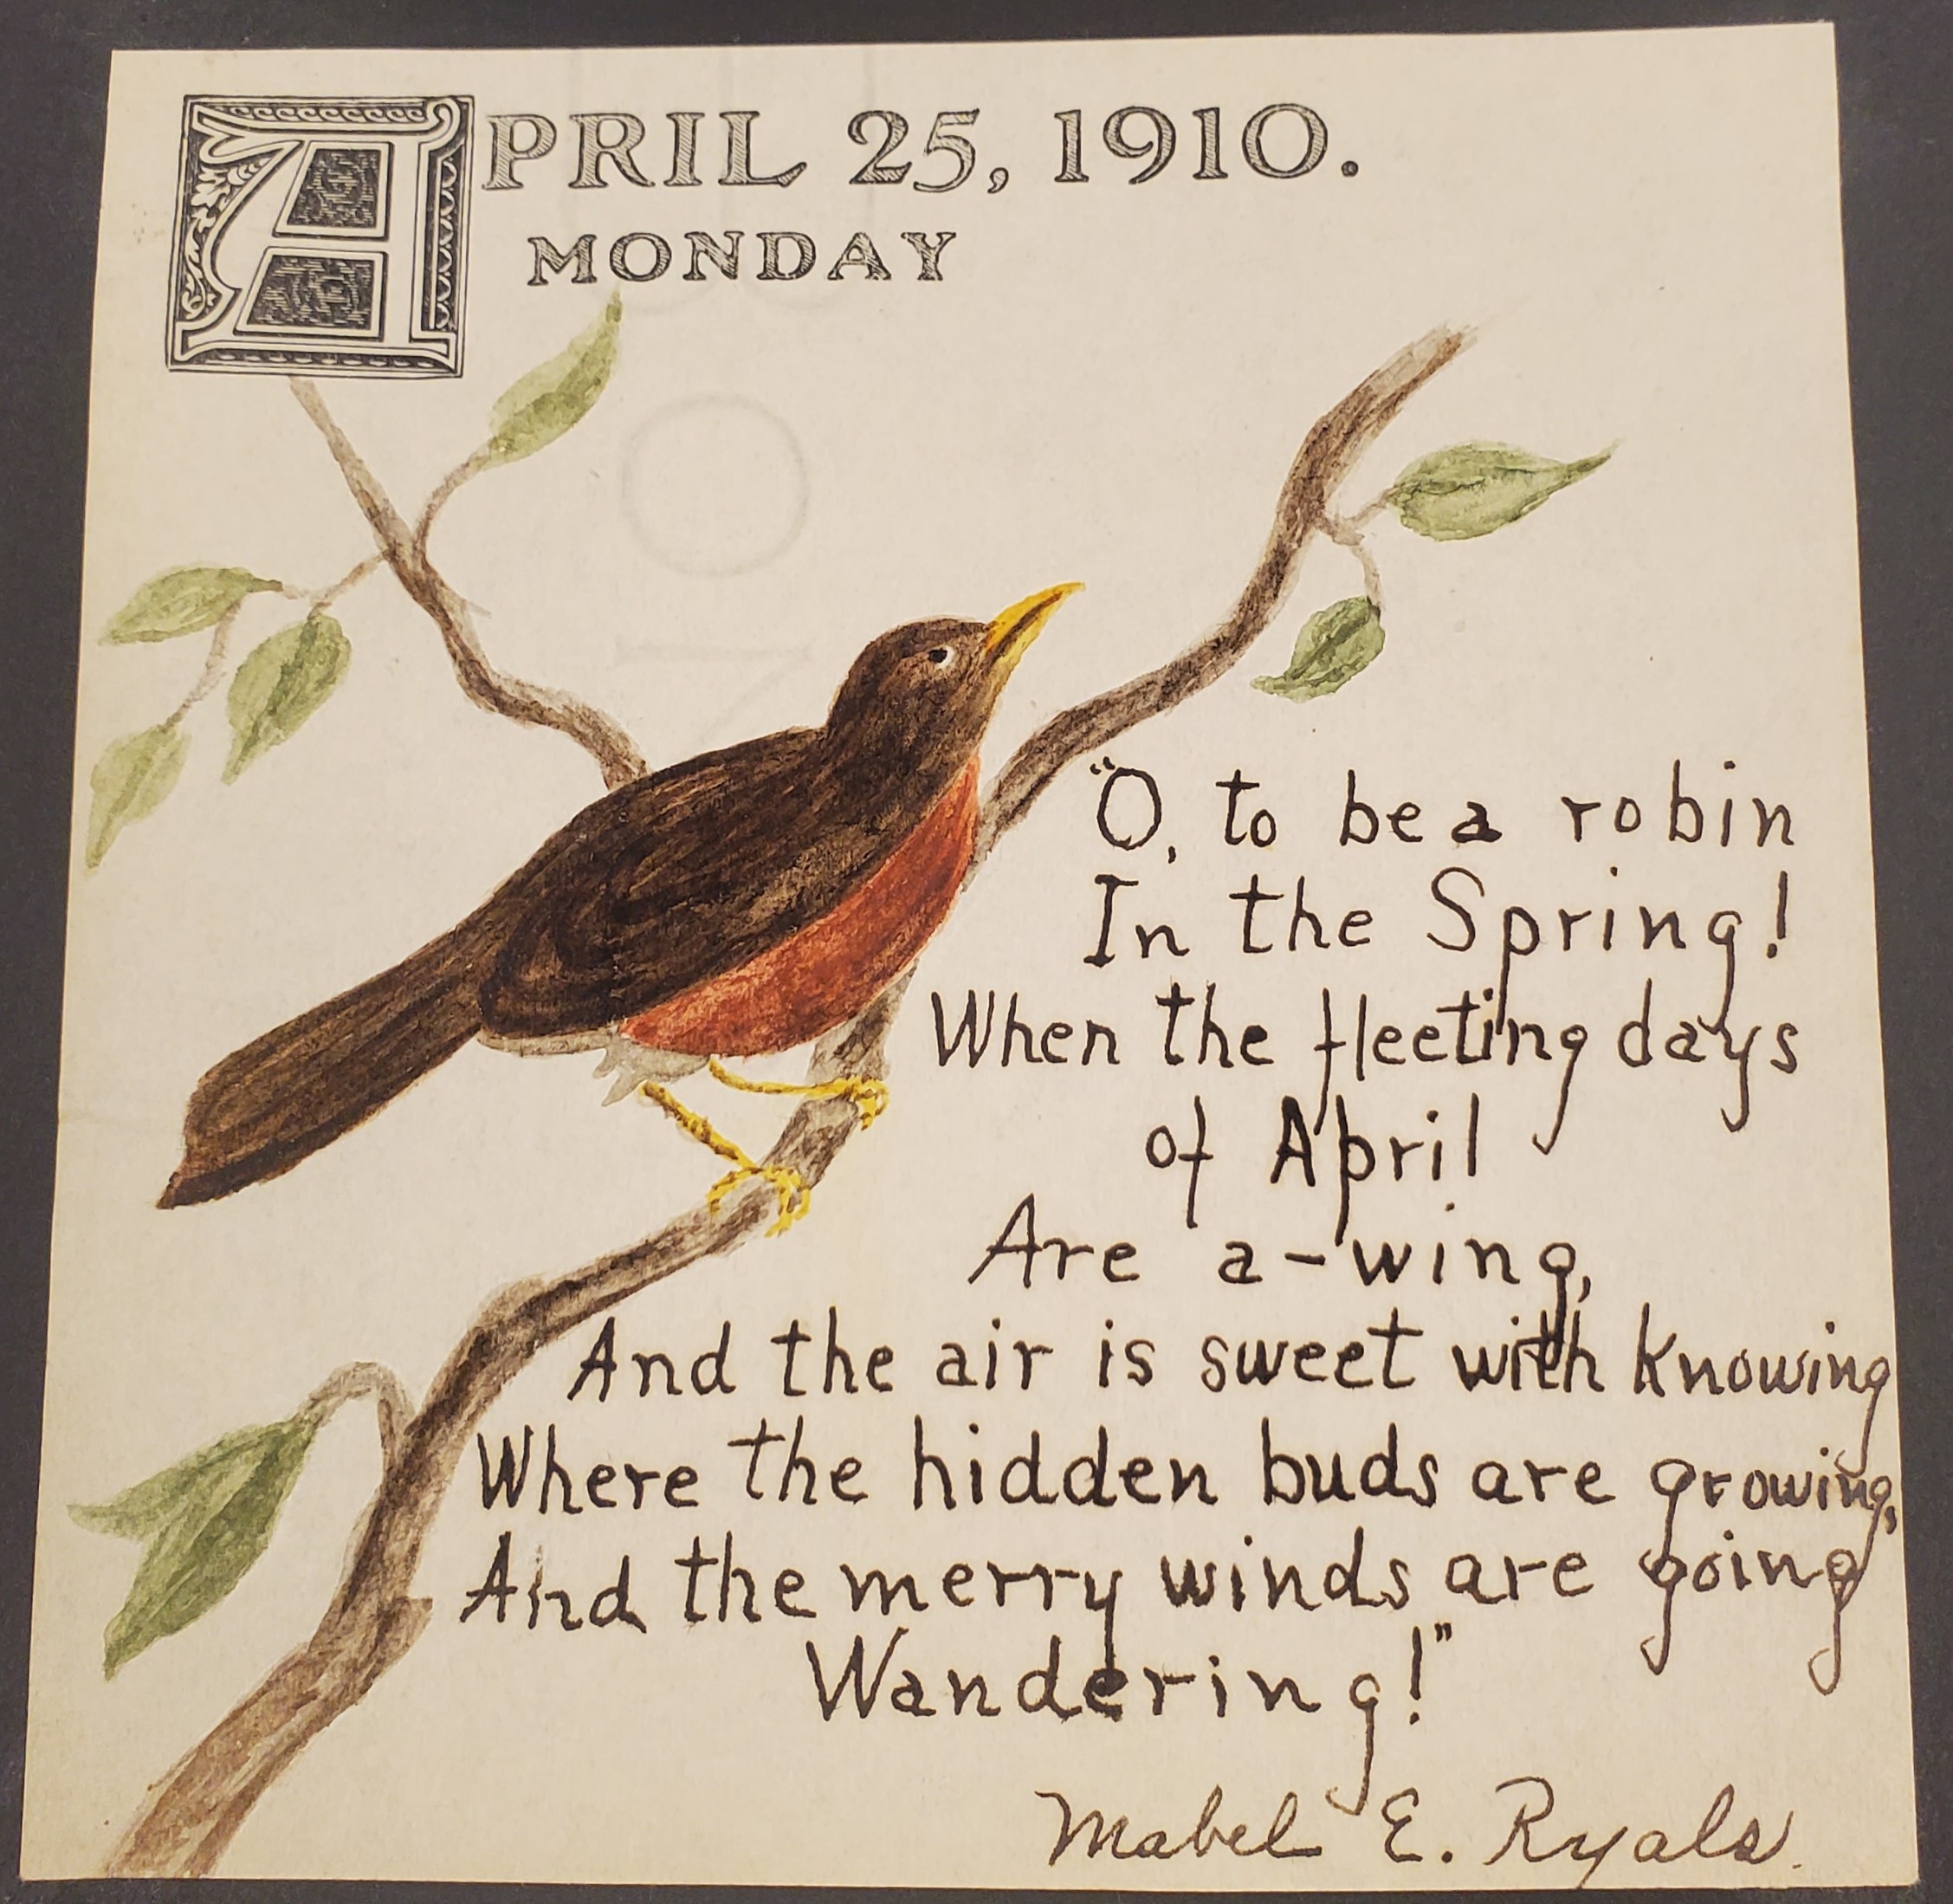 Square note with the date April 25, 1910 at the top. Watercolor robin on a branch and a poem: “O, to be a robin In the Spring! When the fleeting days of April are a-wing, And the air is sweet with knowing, Where the hidden buds are growing, And the merry winds are going Wandering!” The note is signed Mabel E. Ryals